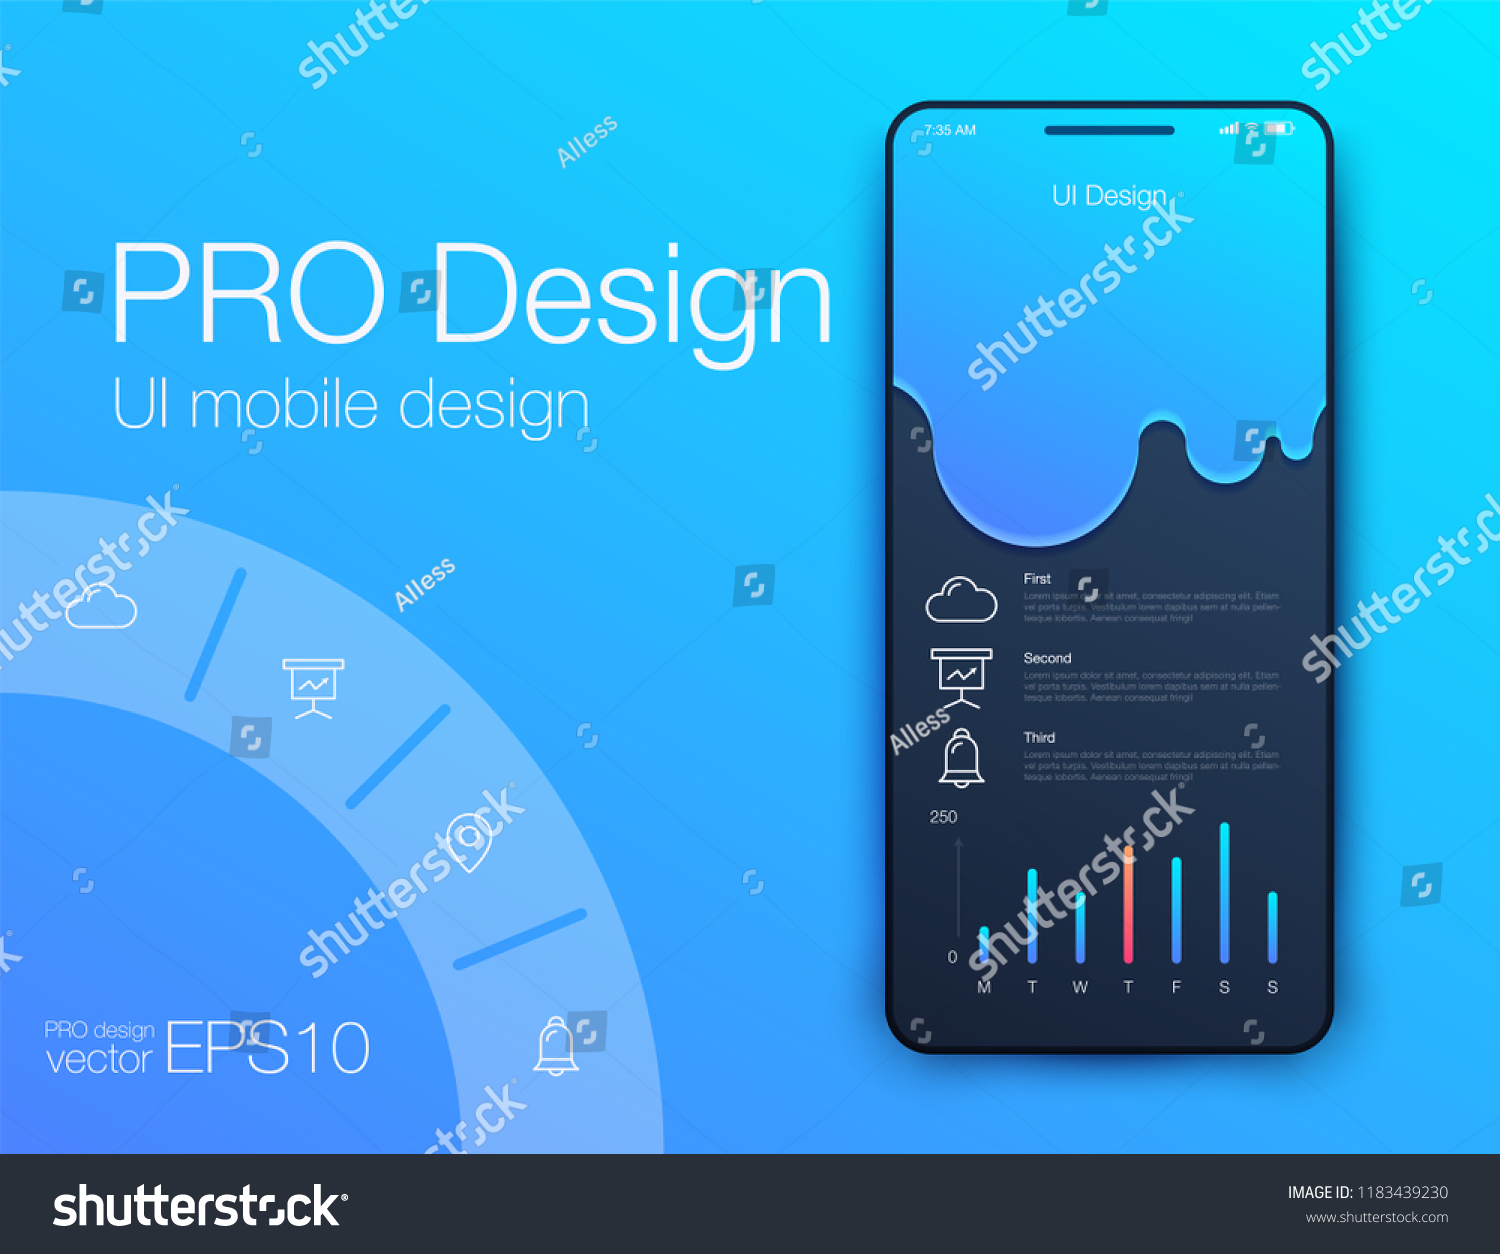 Vector Illustration of screens and web concept. Interface UX, UI GUI screen template for web site banners. Sign up #1183439230